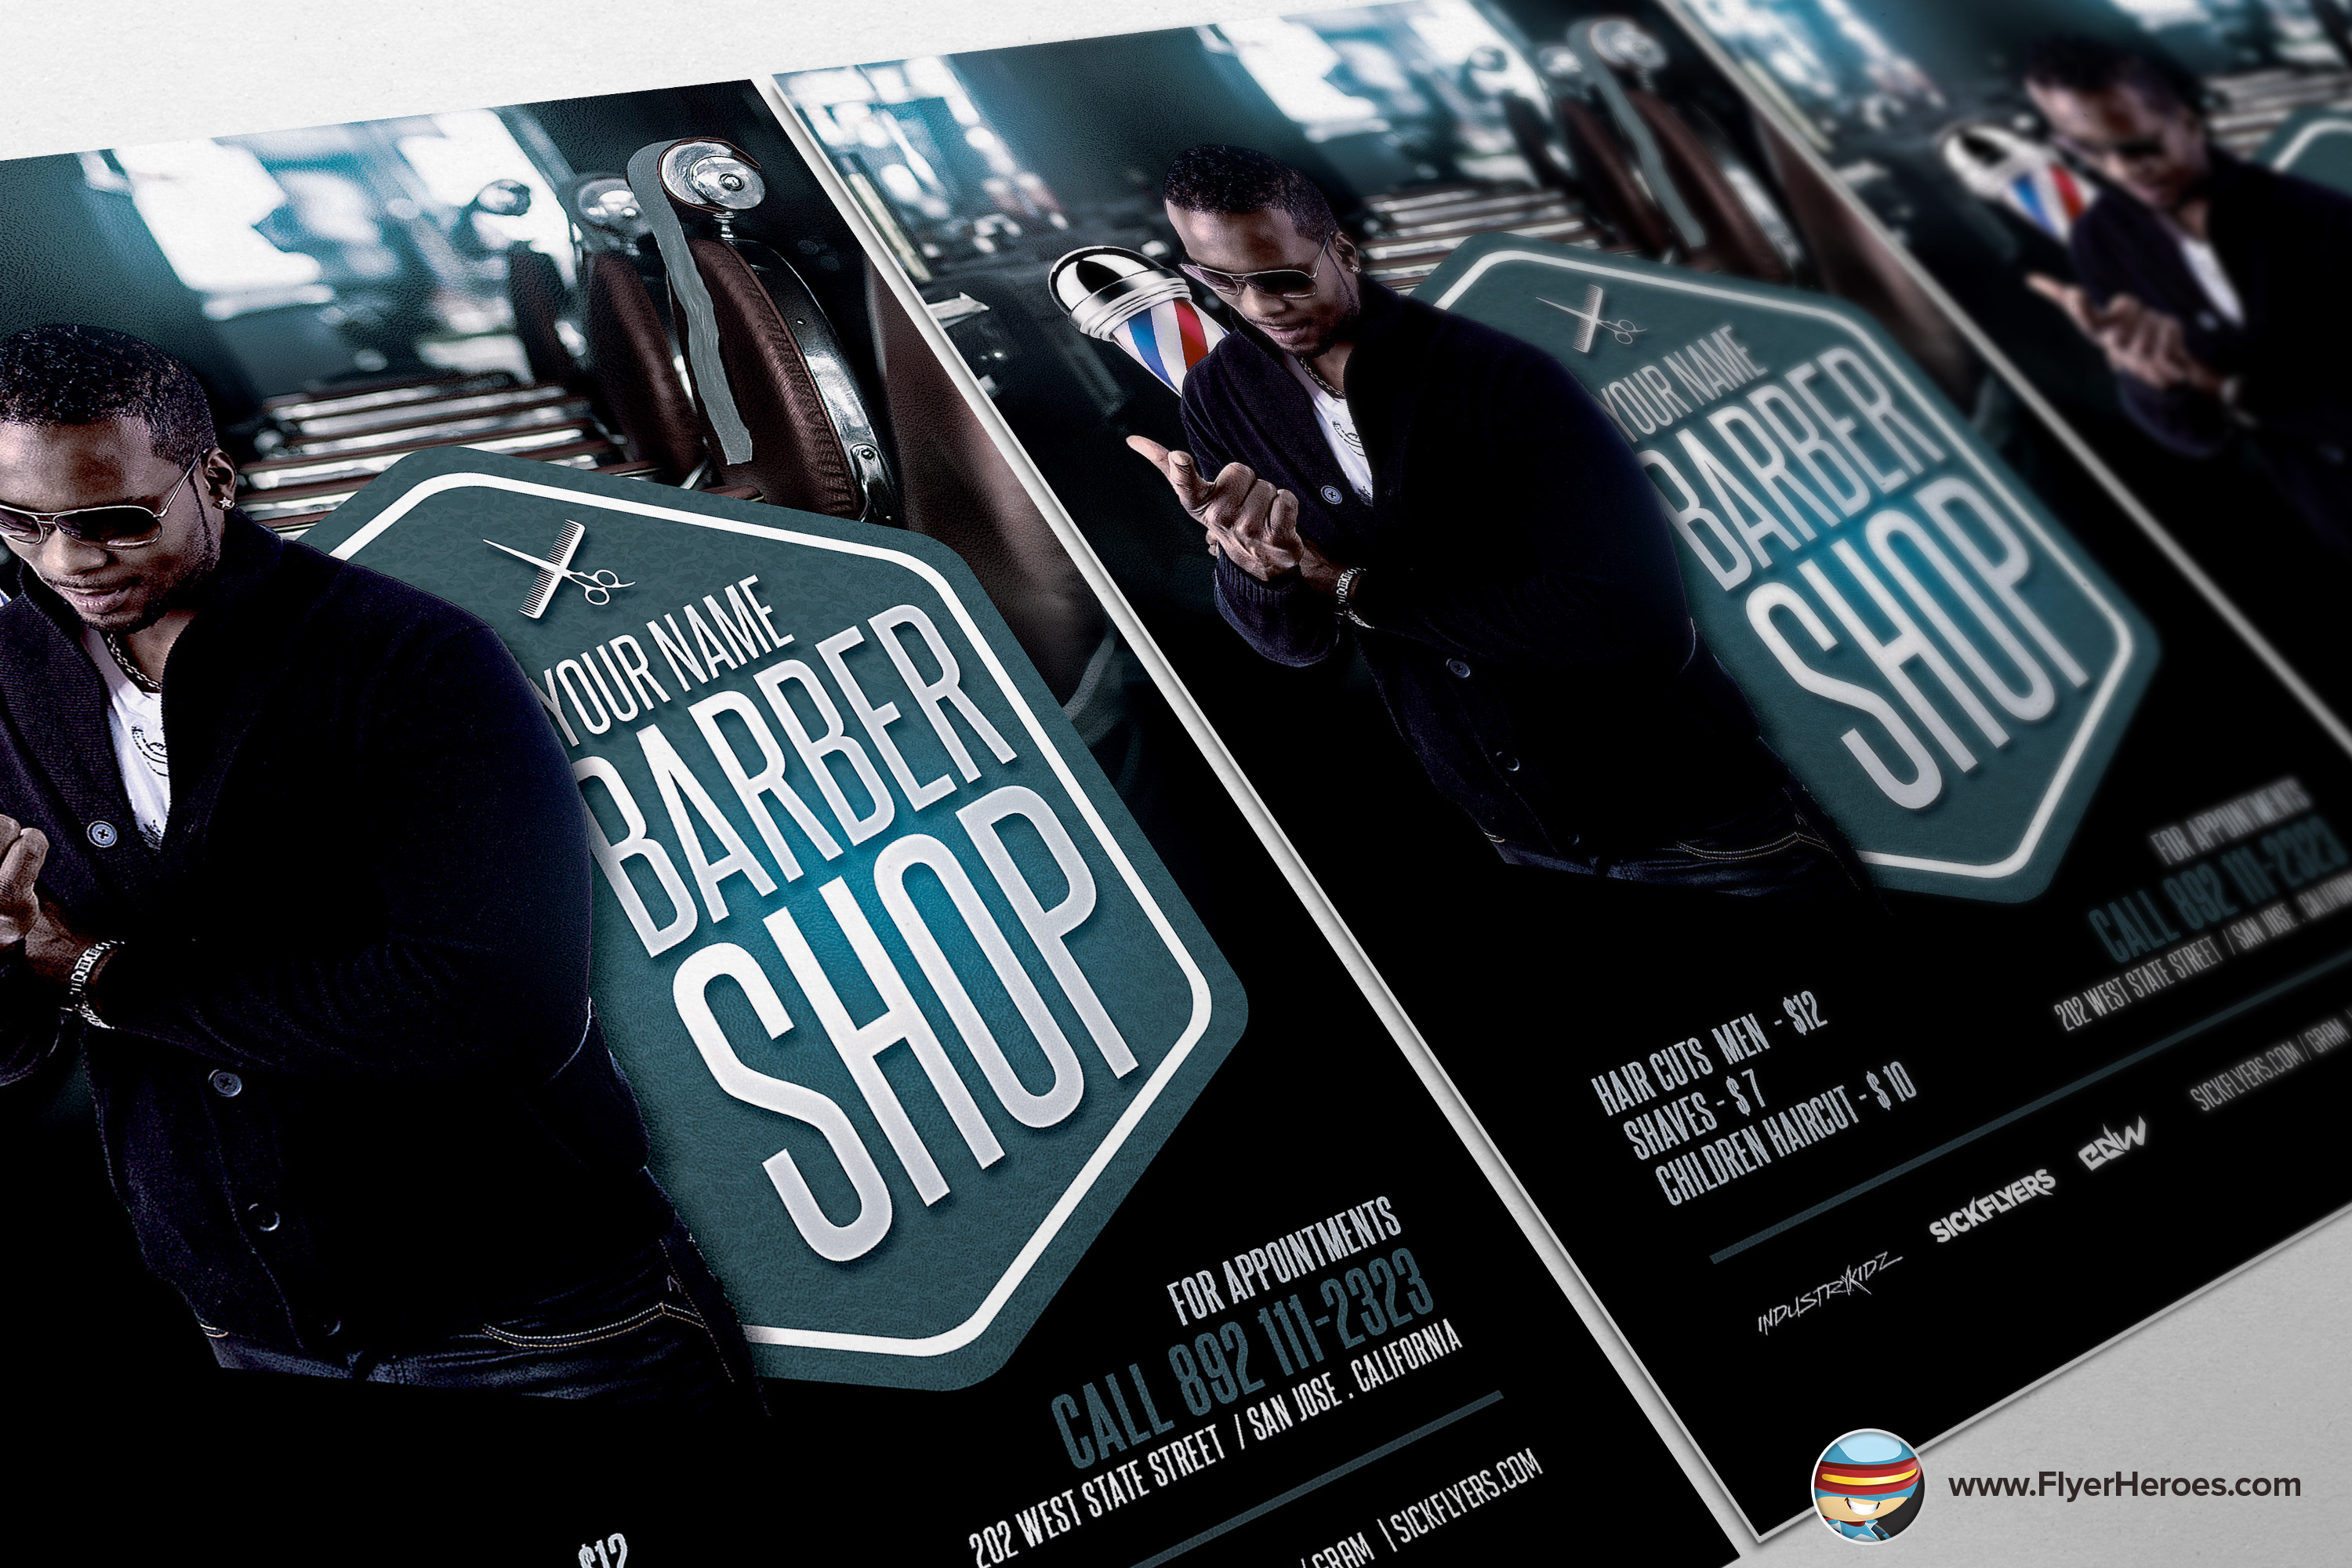 Barber's Shop Flyer Template ~ Flyer Templates on Creative ...